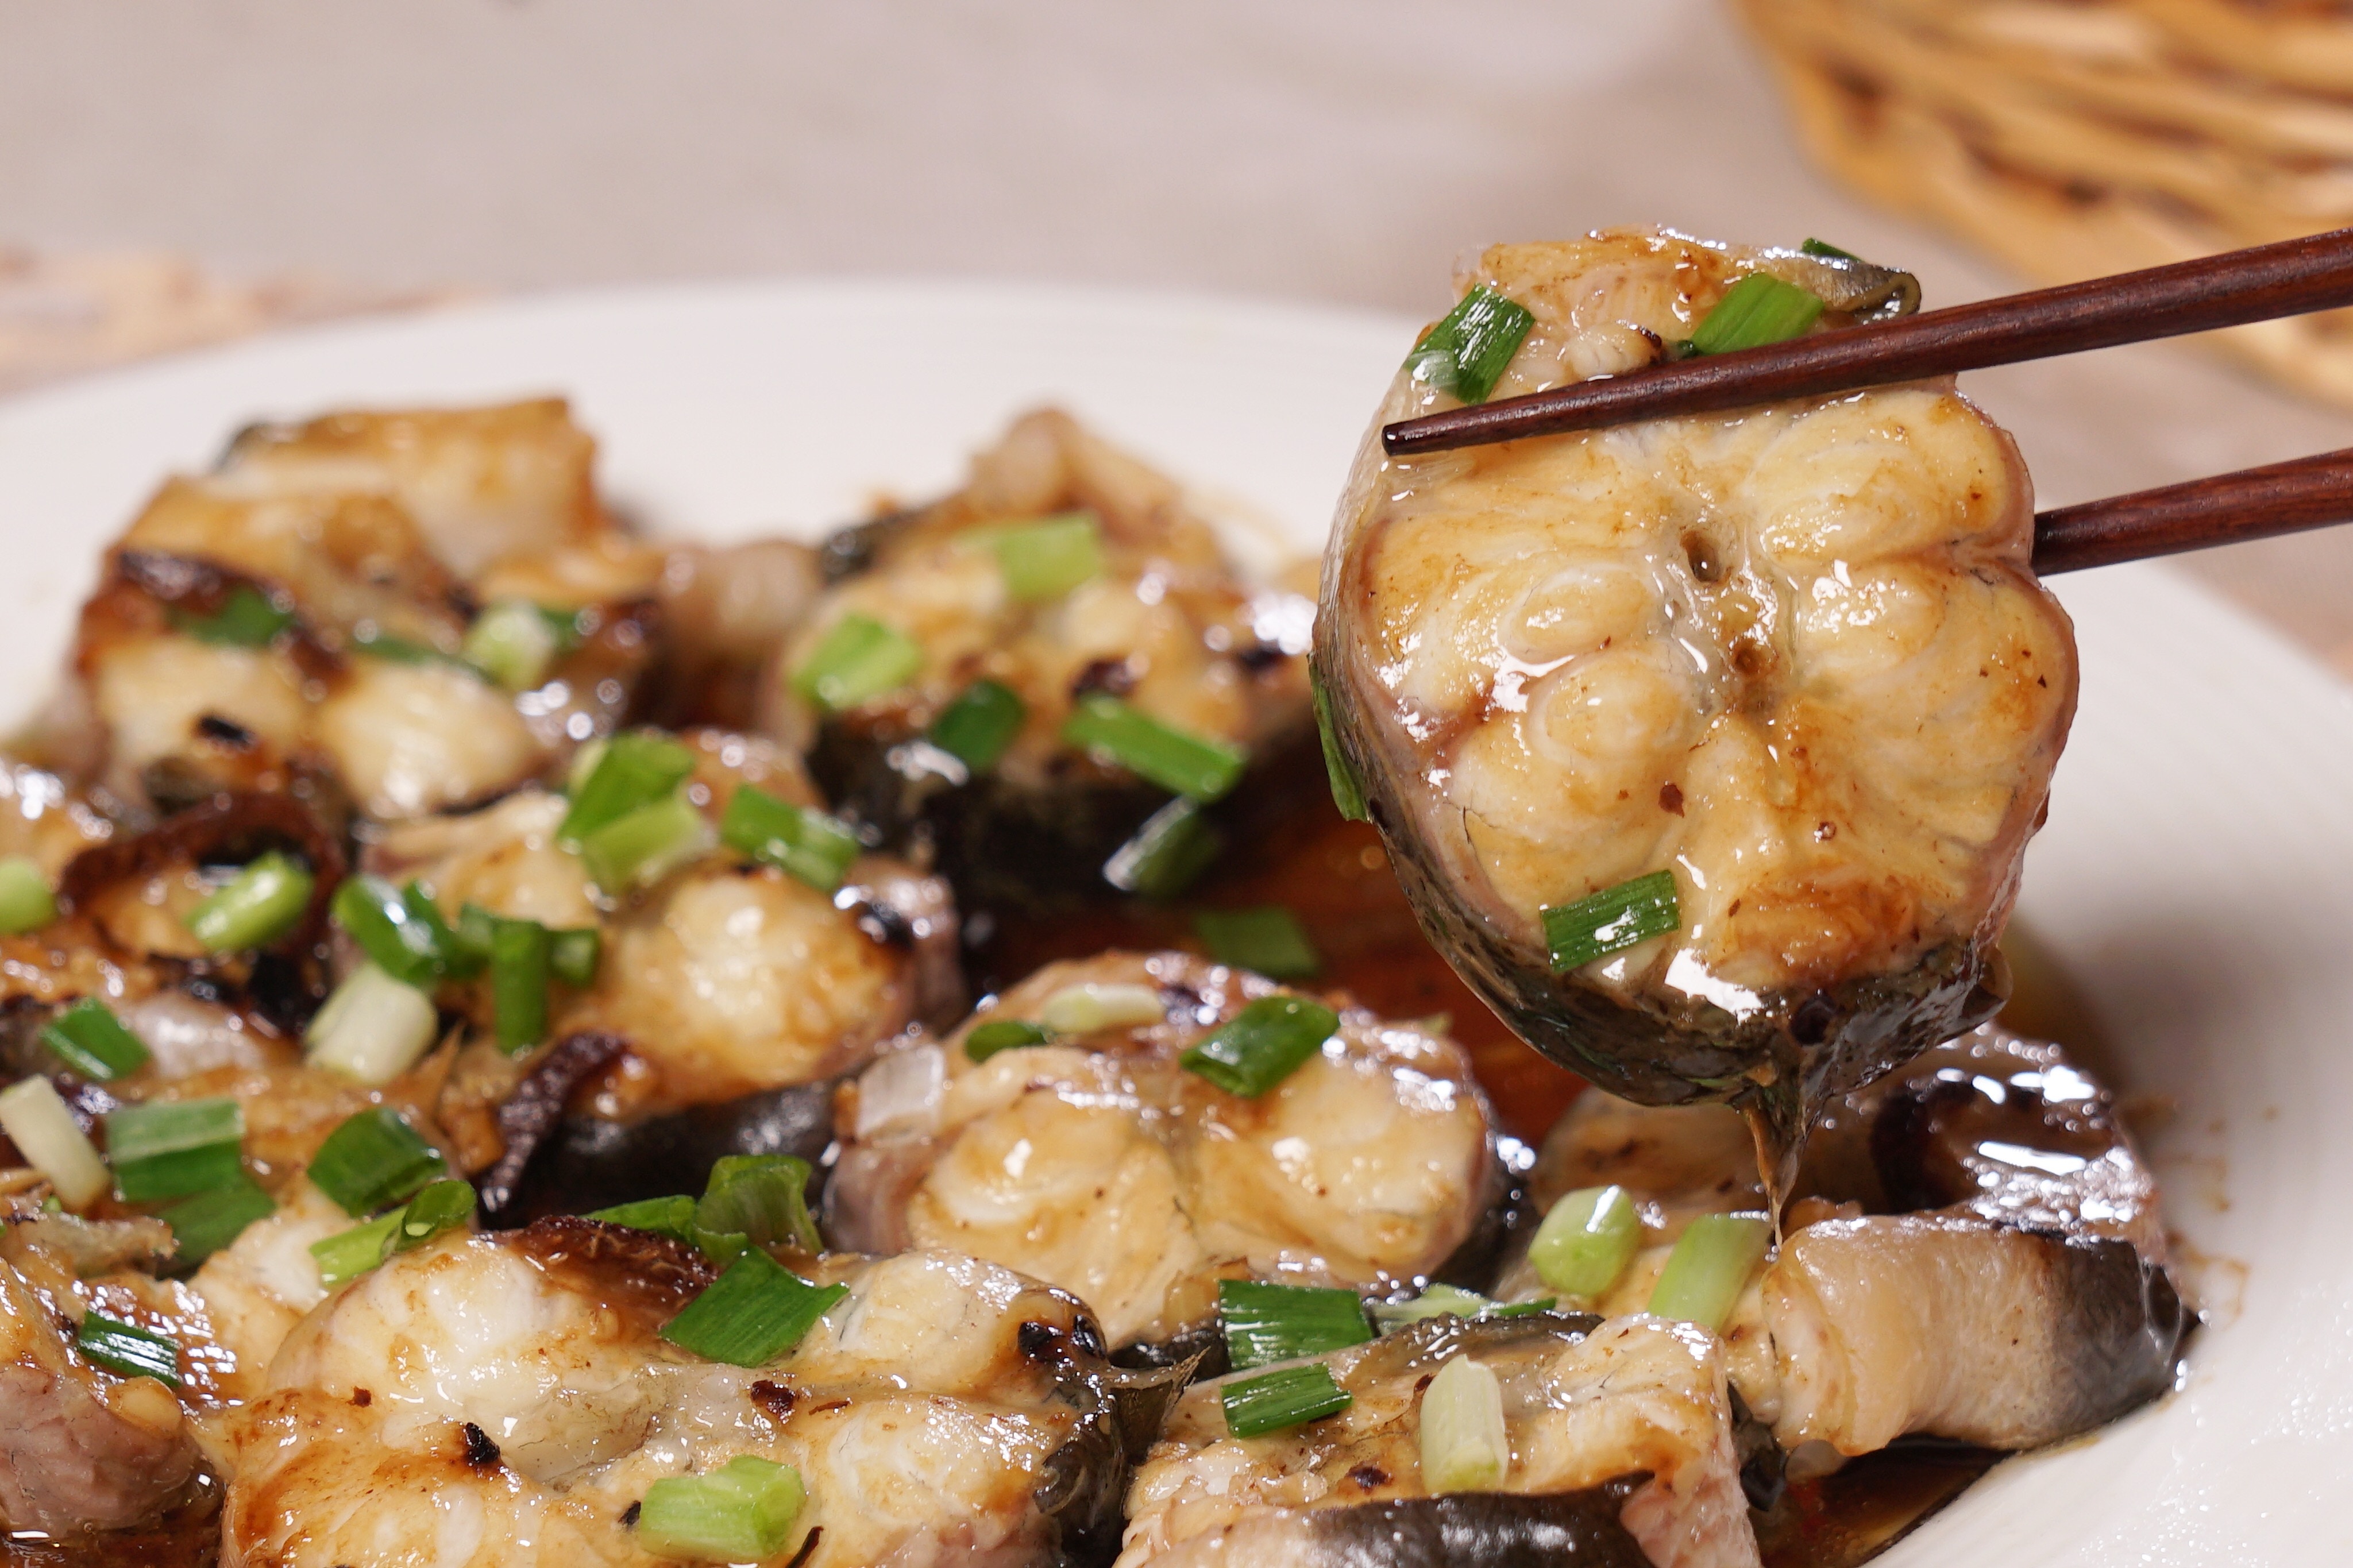 Steamed Fresh Water Eel with Black Bean Sauce (豉汁蒸白鱔)